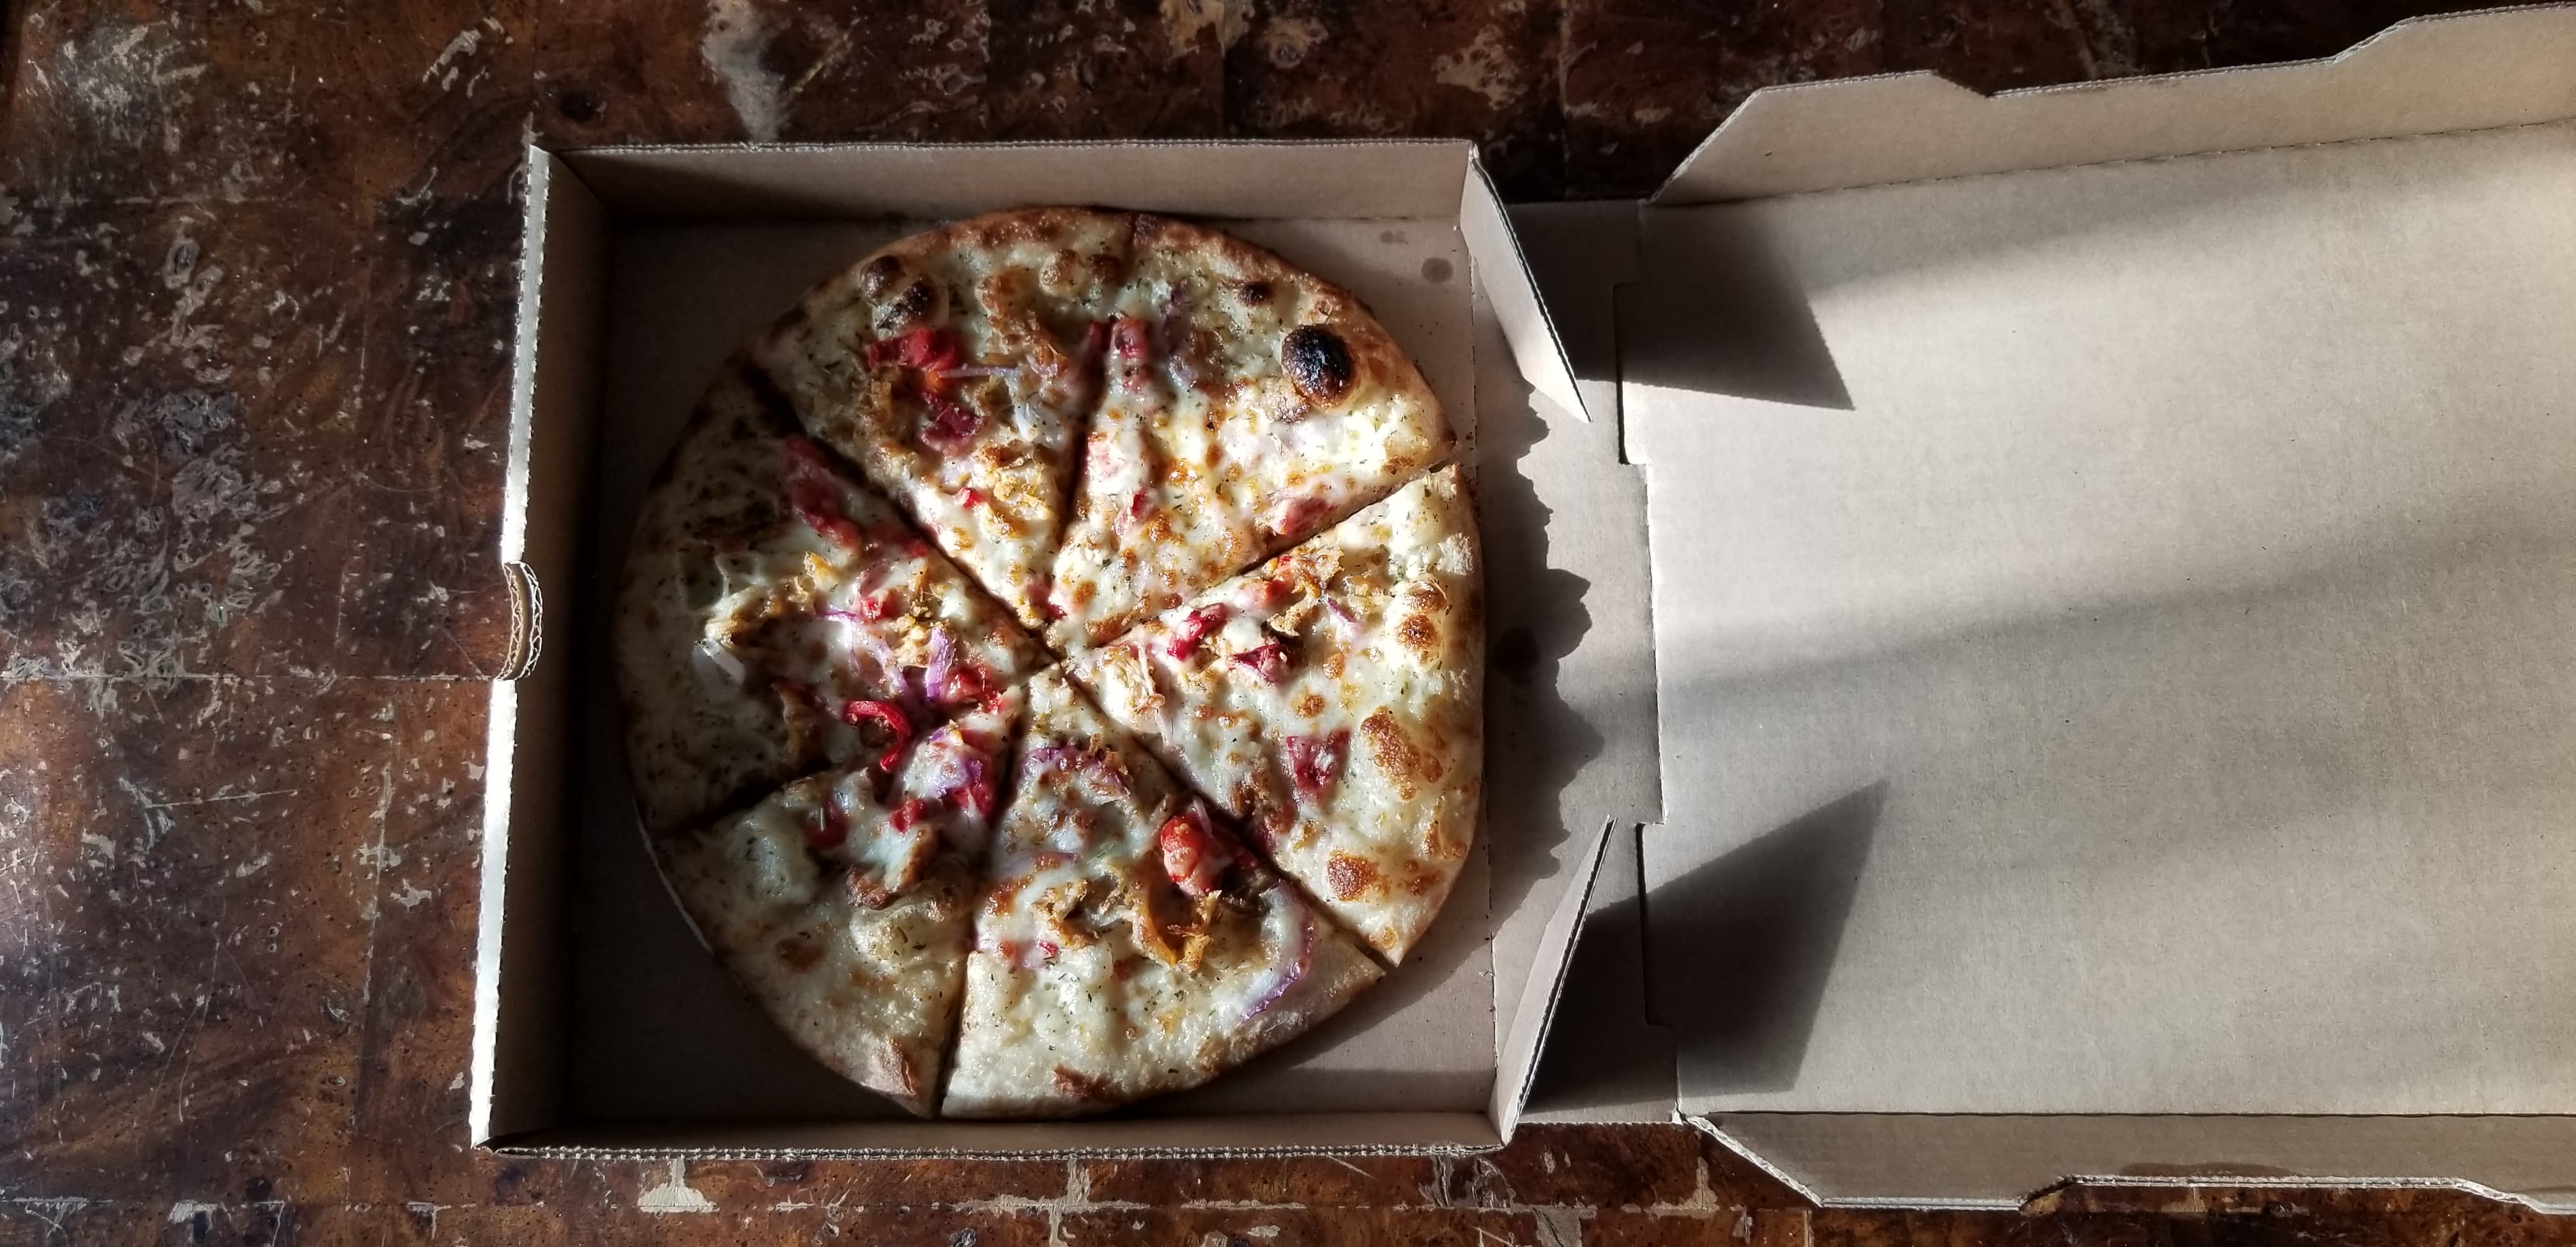 On a sun-drenched table, there is an open cardboard pizza box with a full BYO pizza sliced. Photo by Nina Hopkins.